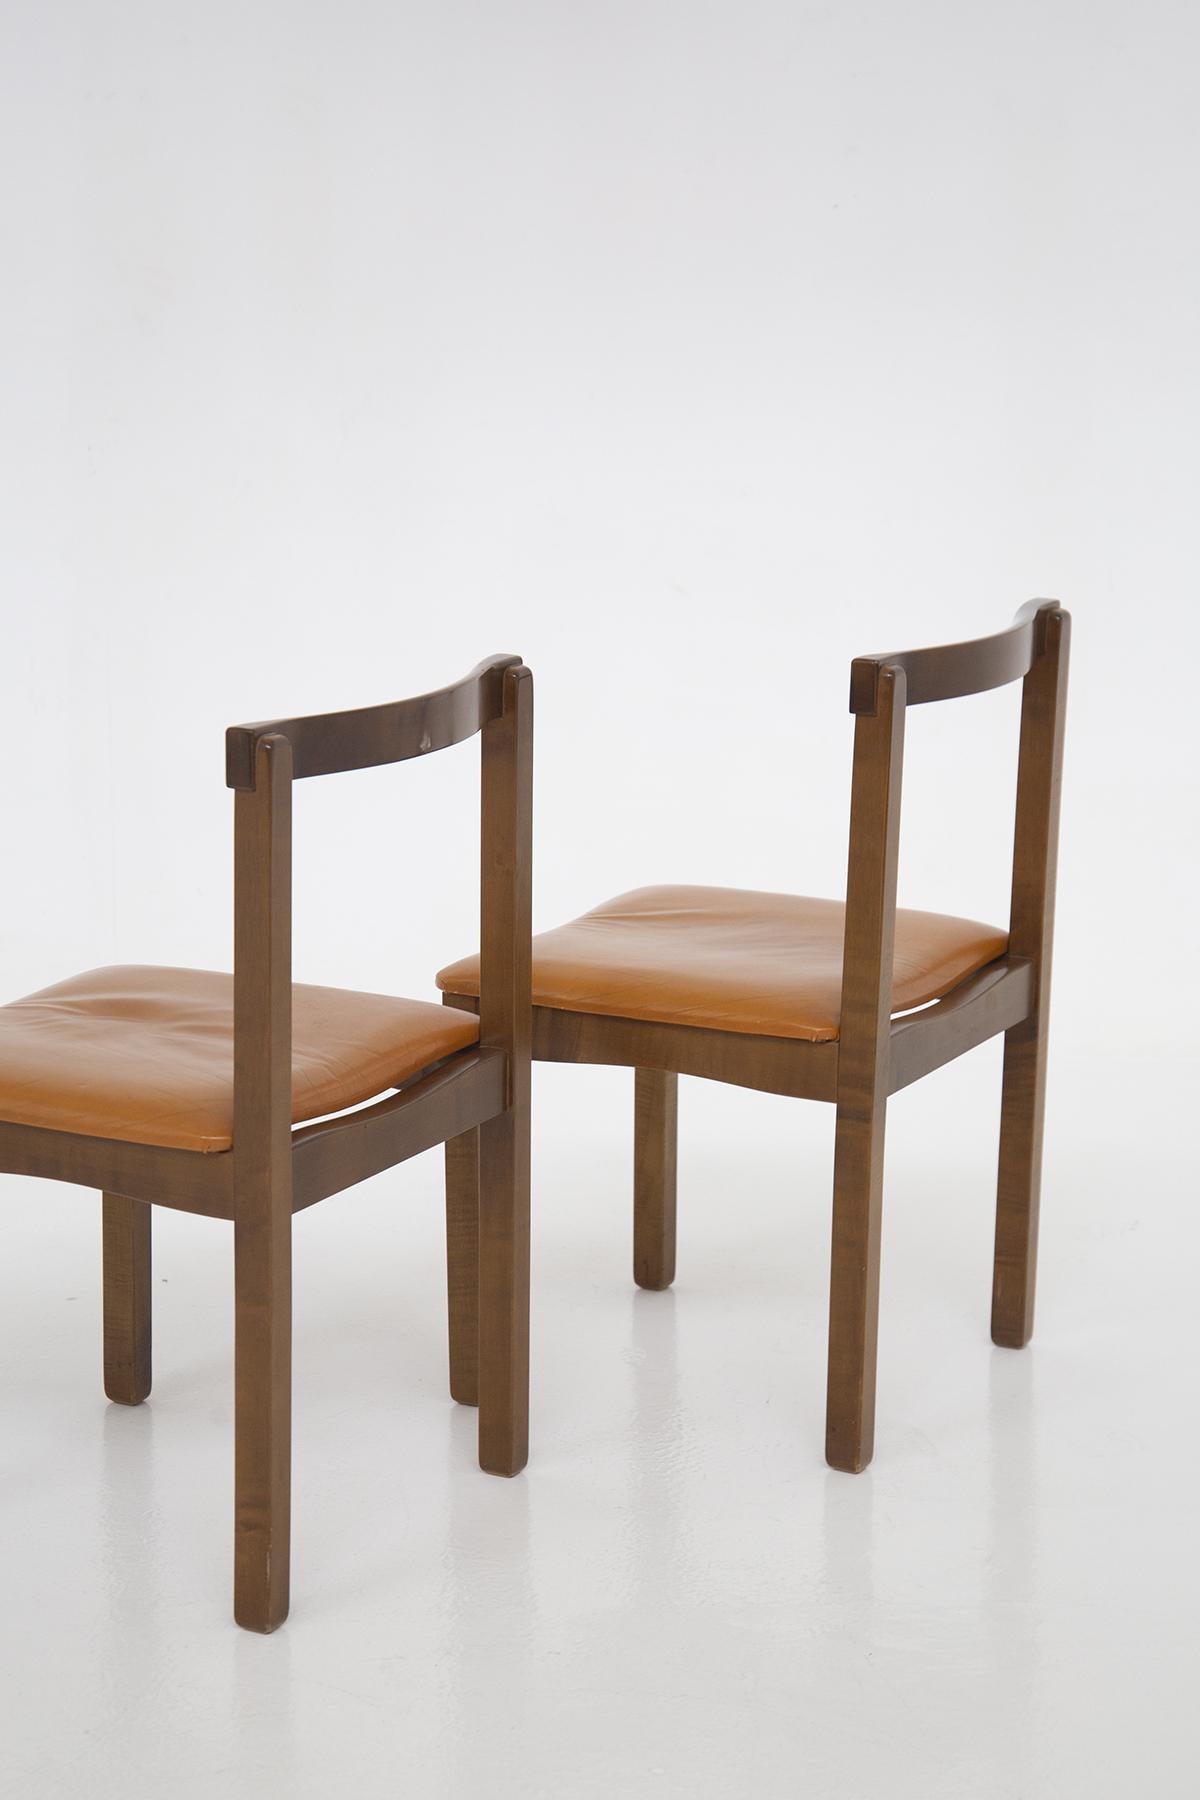 Mid-20th Century Set of Four Wooden Chairs by Vittorio Introini for Sormani For Sale